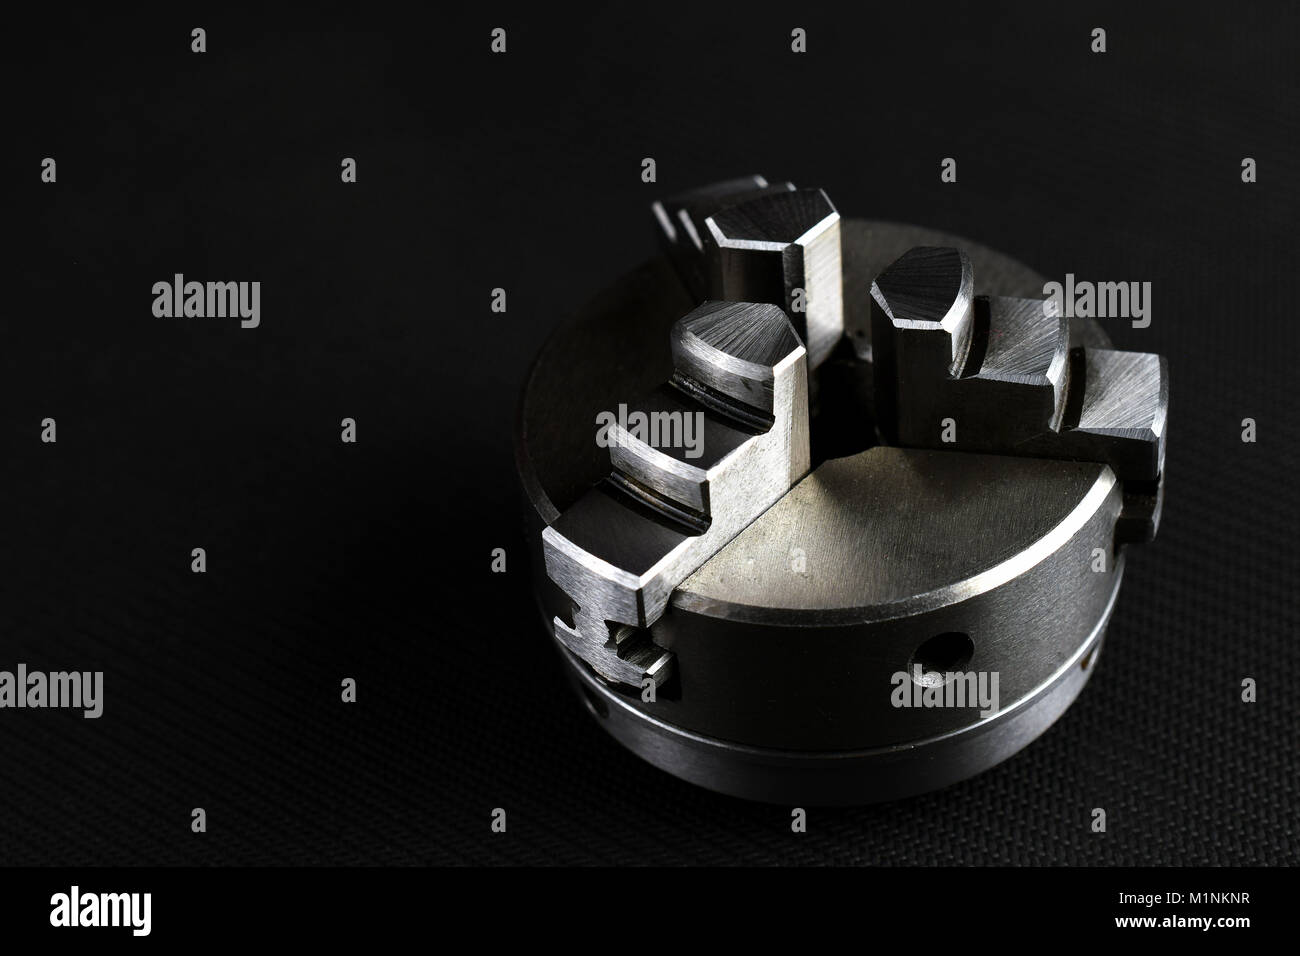 3 jaw chuck for metal lathe on black background. Horizontal industrial background image with space for text. Stock Photo